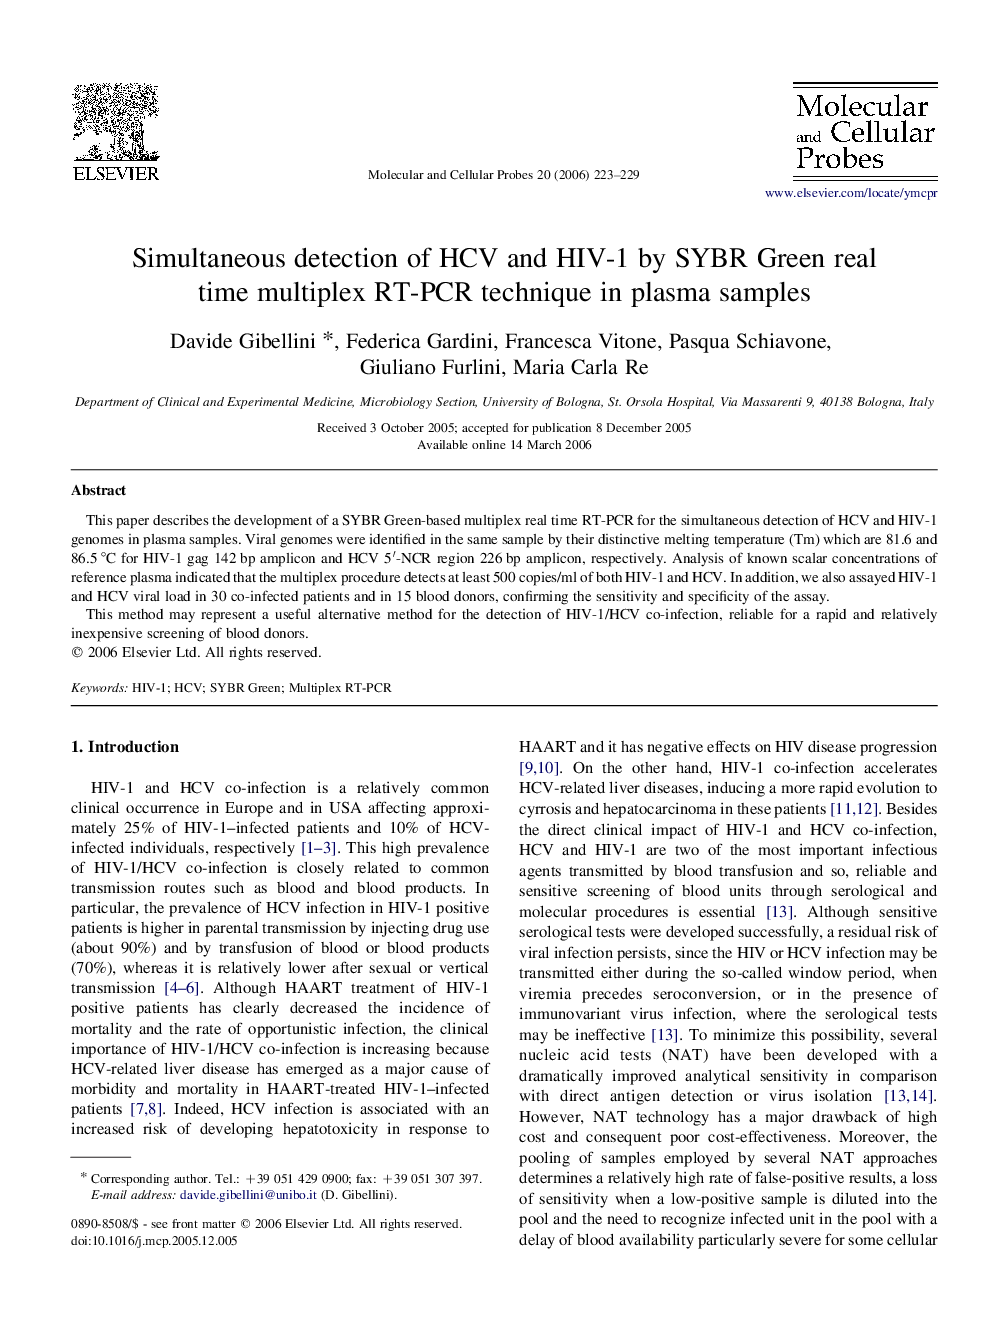 Simultaneous detection of HCV and HIV-1 by SYBR Green real time multiplex RT-PCR technique in plasma samples